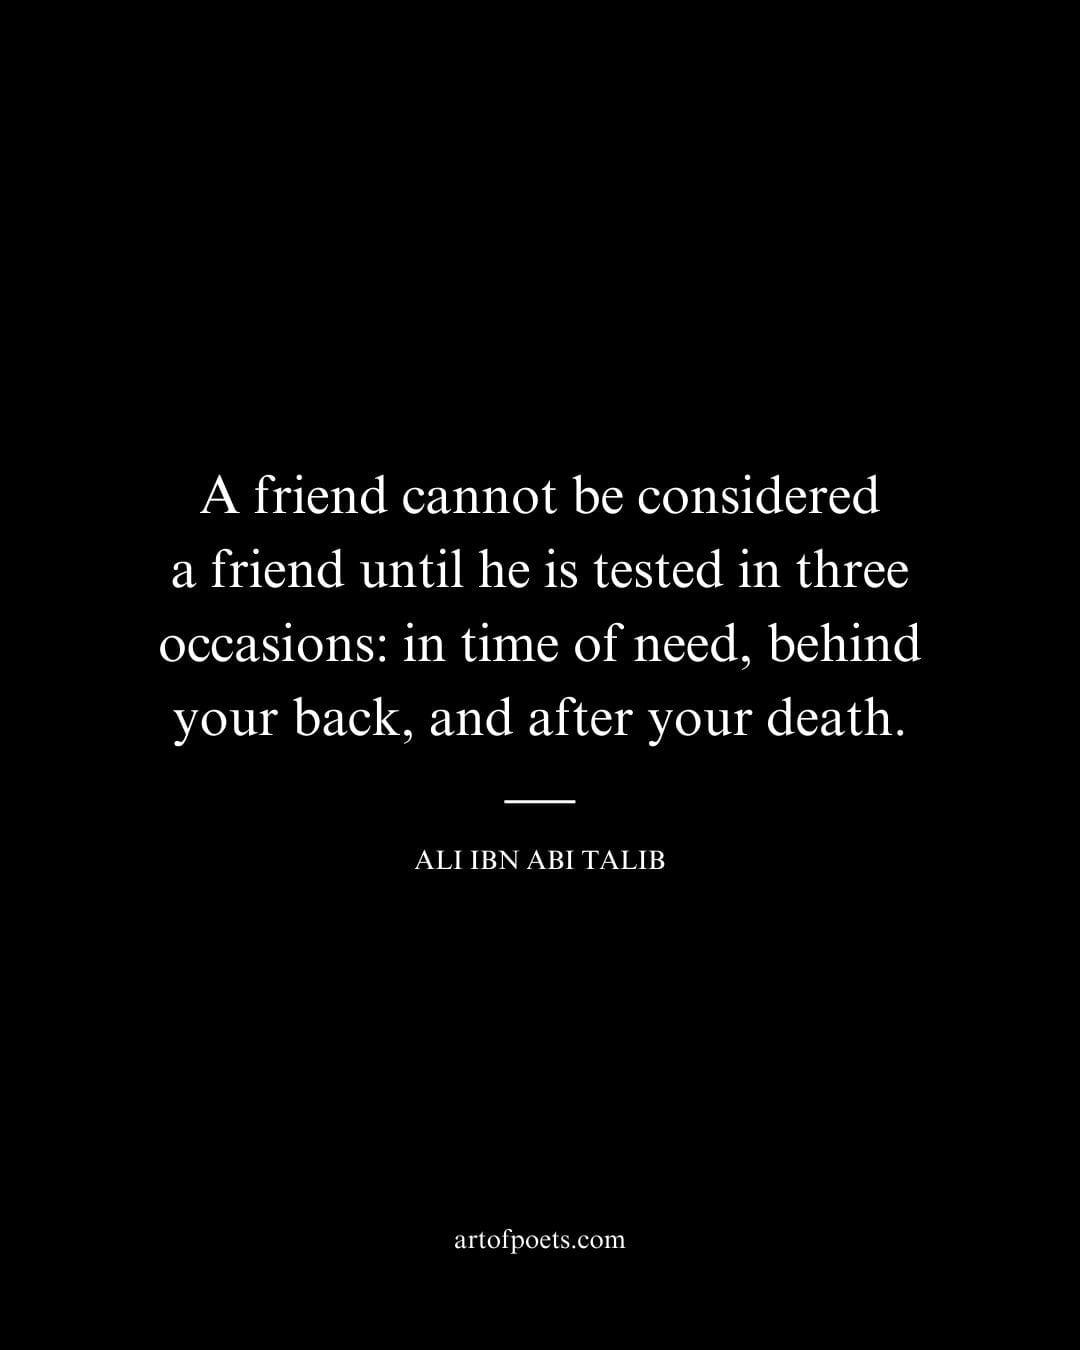 A friend cannot be considered a friend until he is tested in three occasions in time of need behind your back and after your death